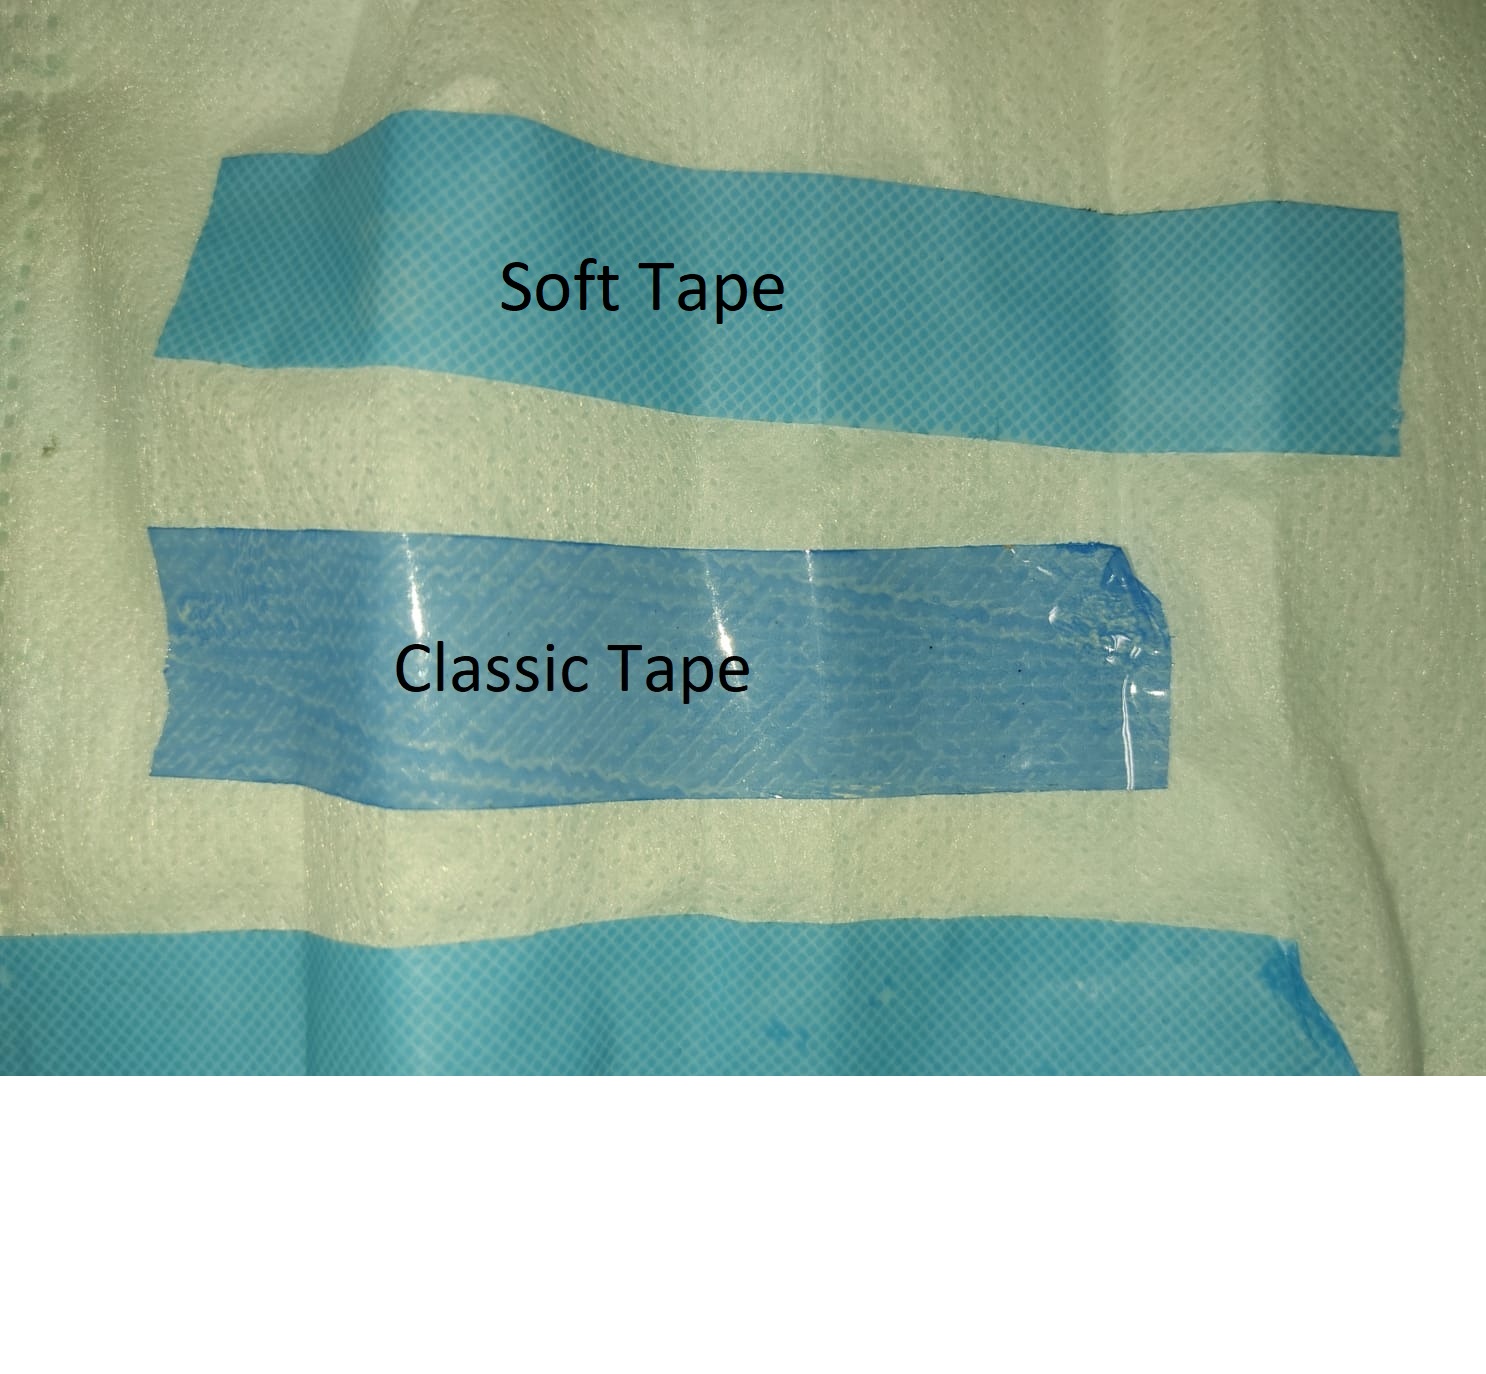 Surgical Garment tape